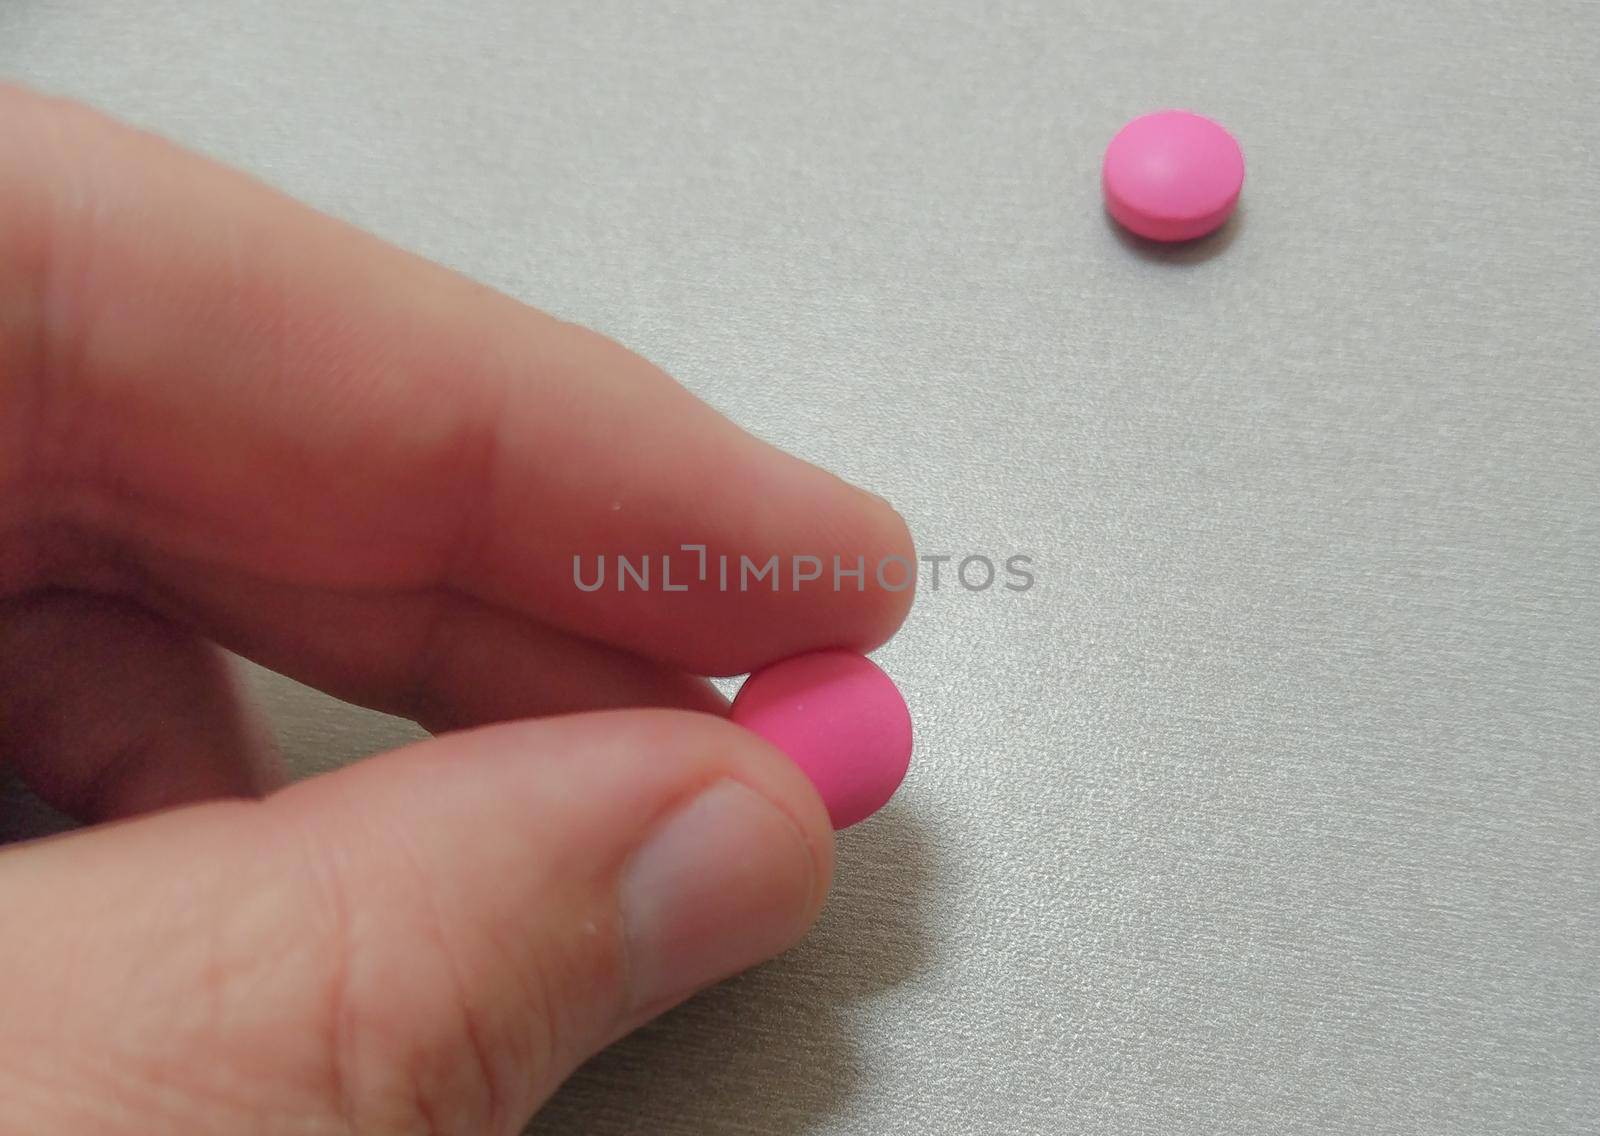 pink pill and hand by Jindrich_Blecha